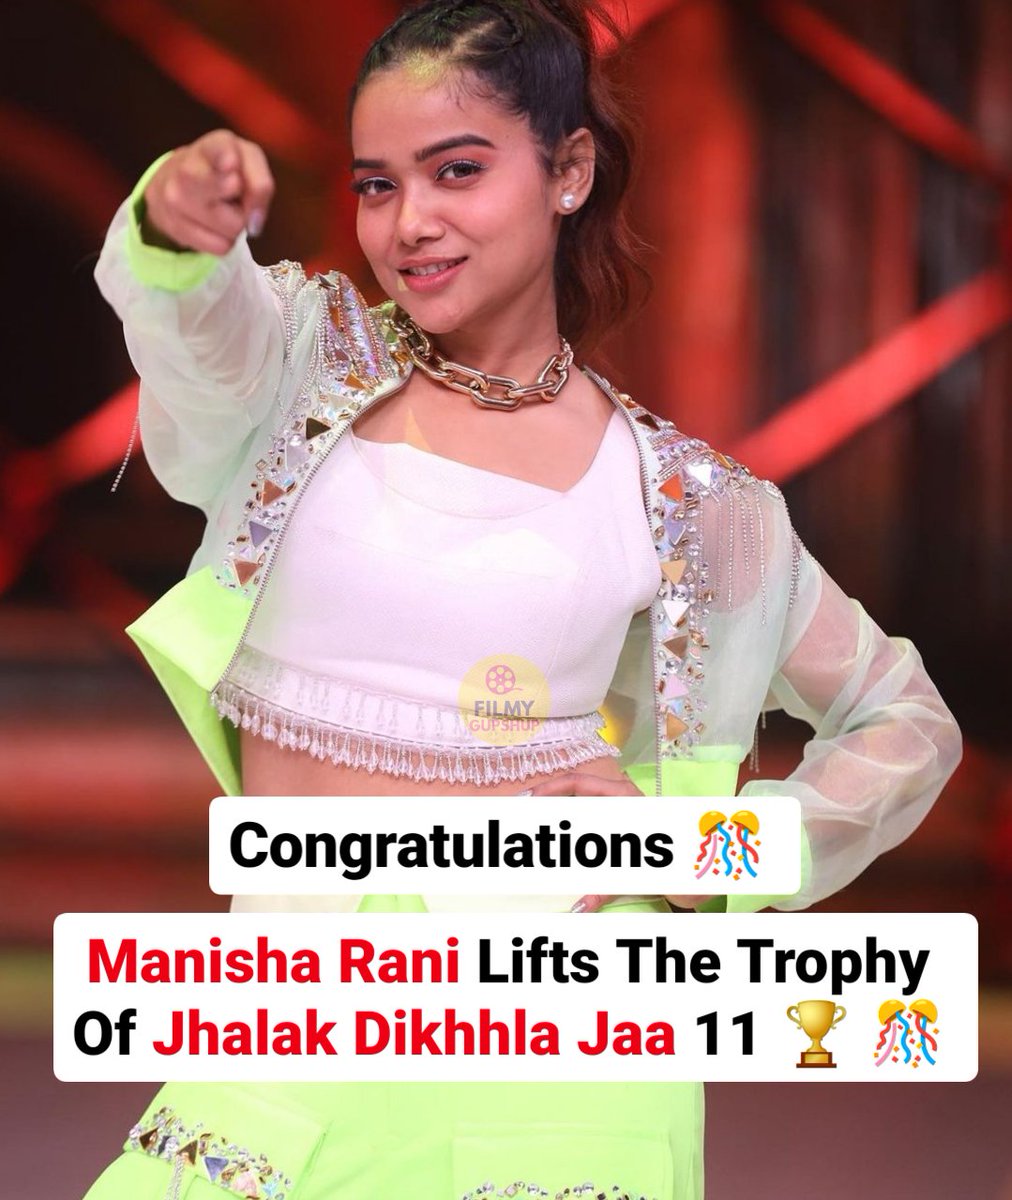 Manisha Rain lifts the trophy of Jhalak Dikhhla Jaa 11 by beating Shoaib Ibrahim and Adrija Sinha in the finale 🏆 

Drop a 'Wish' for her if you are happy 😀

Follow @FilmyGupshups for more!

#ManishaRani #JhalakDikhhlaJaa11 #JDJ11 #ShoaibIbrahim #AdrijaSinha #Filmygupshup